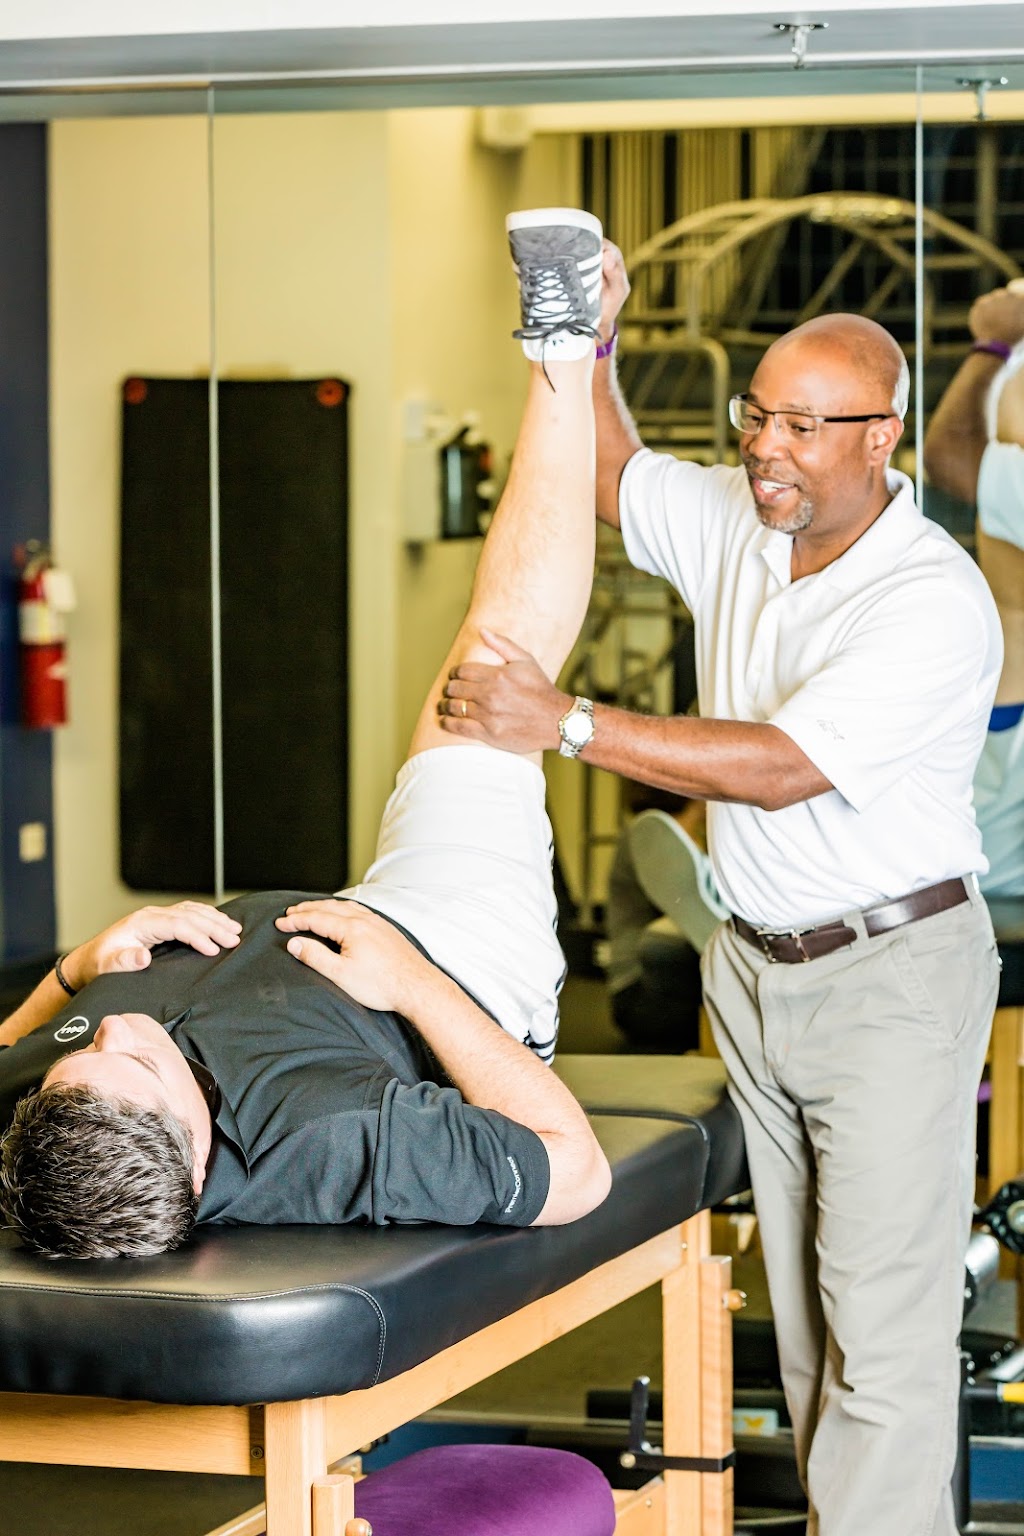 Harmon Physical Therapy | 5191 S Yosemite St suite b, Greenwood Village, CO 80111, USA | Phone: (720) 593-9456